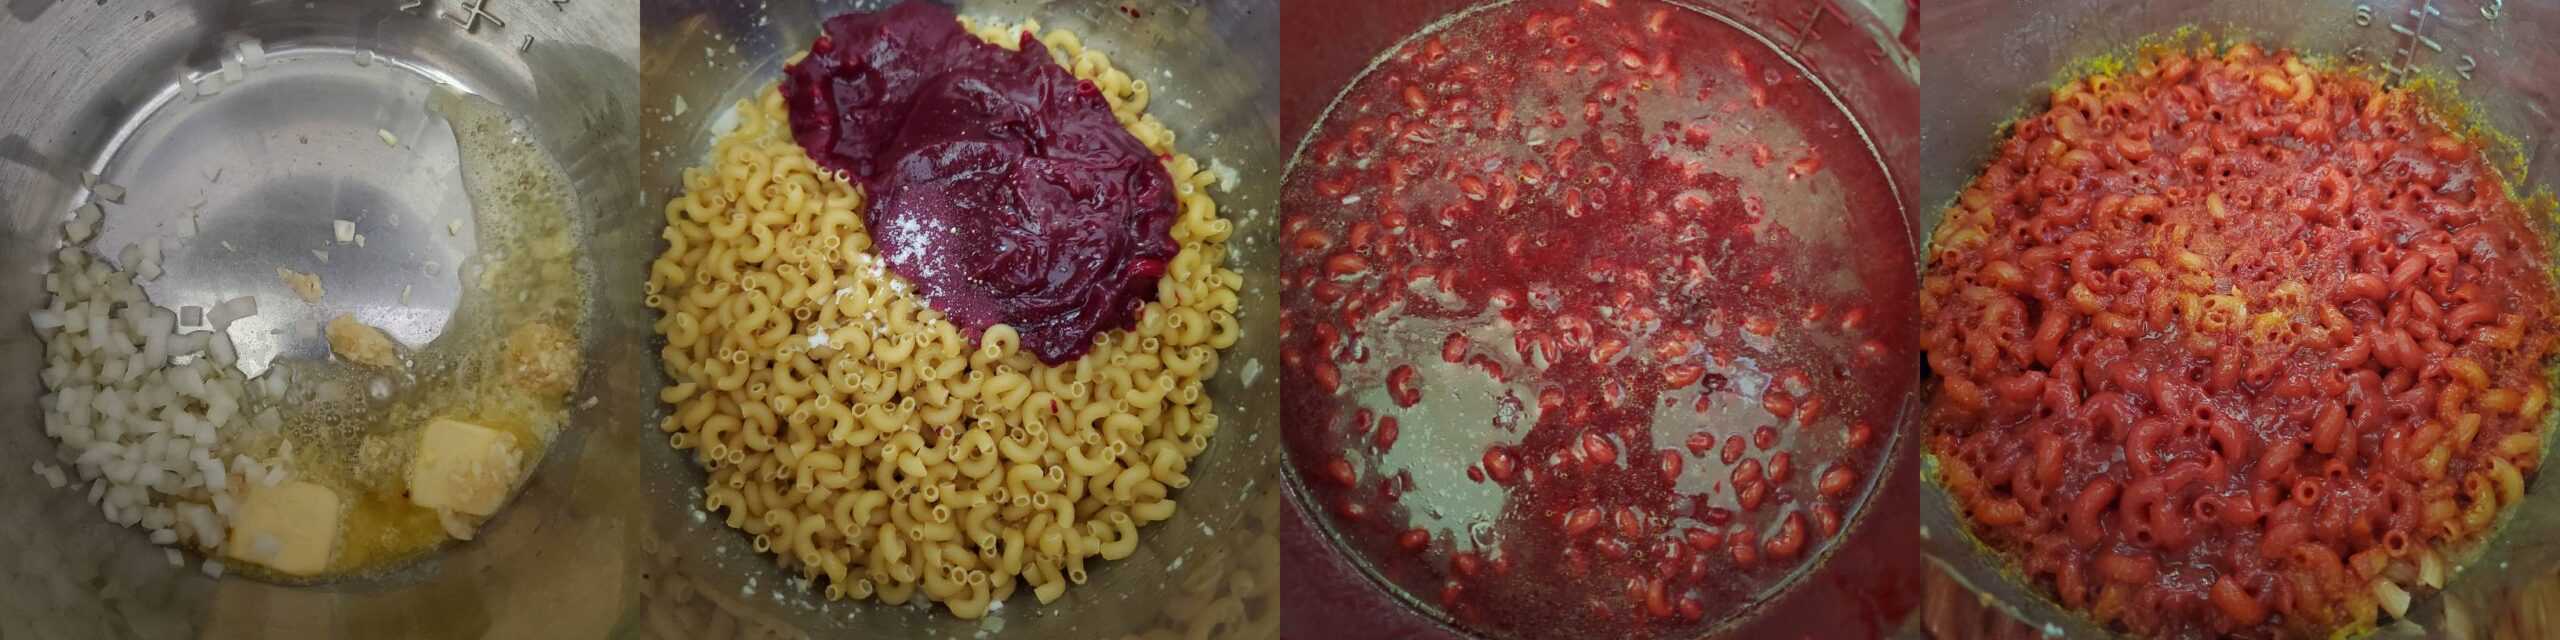 Beet and Carrot Mac and Cheese - Step 2